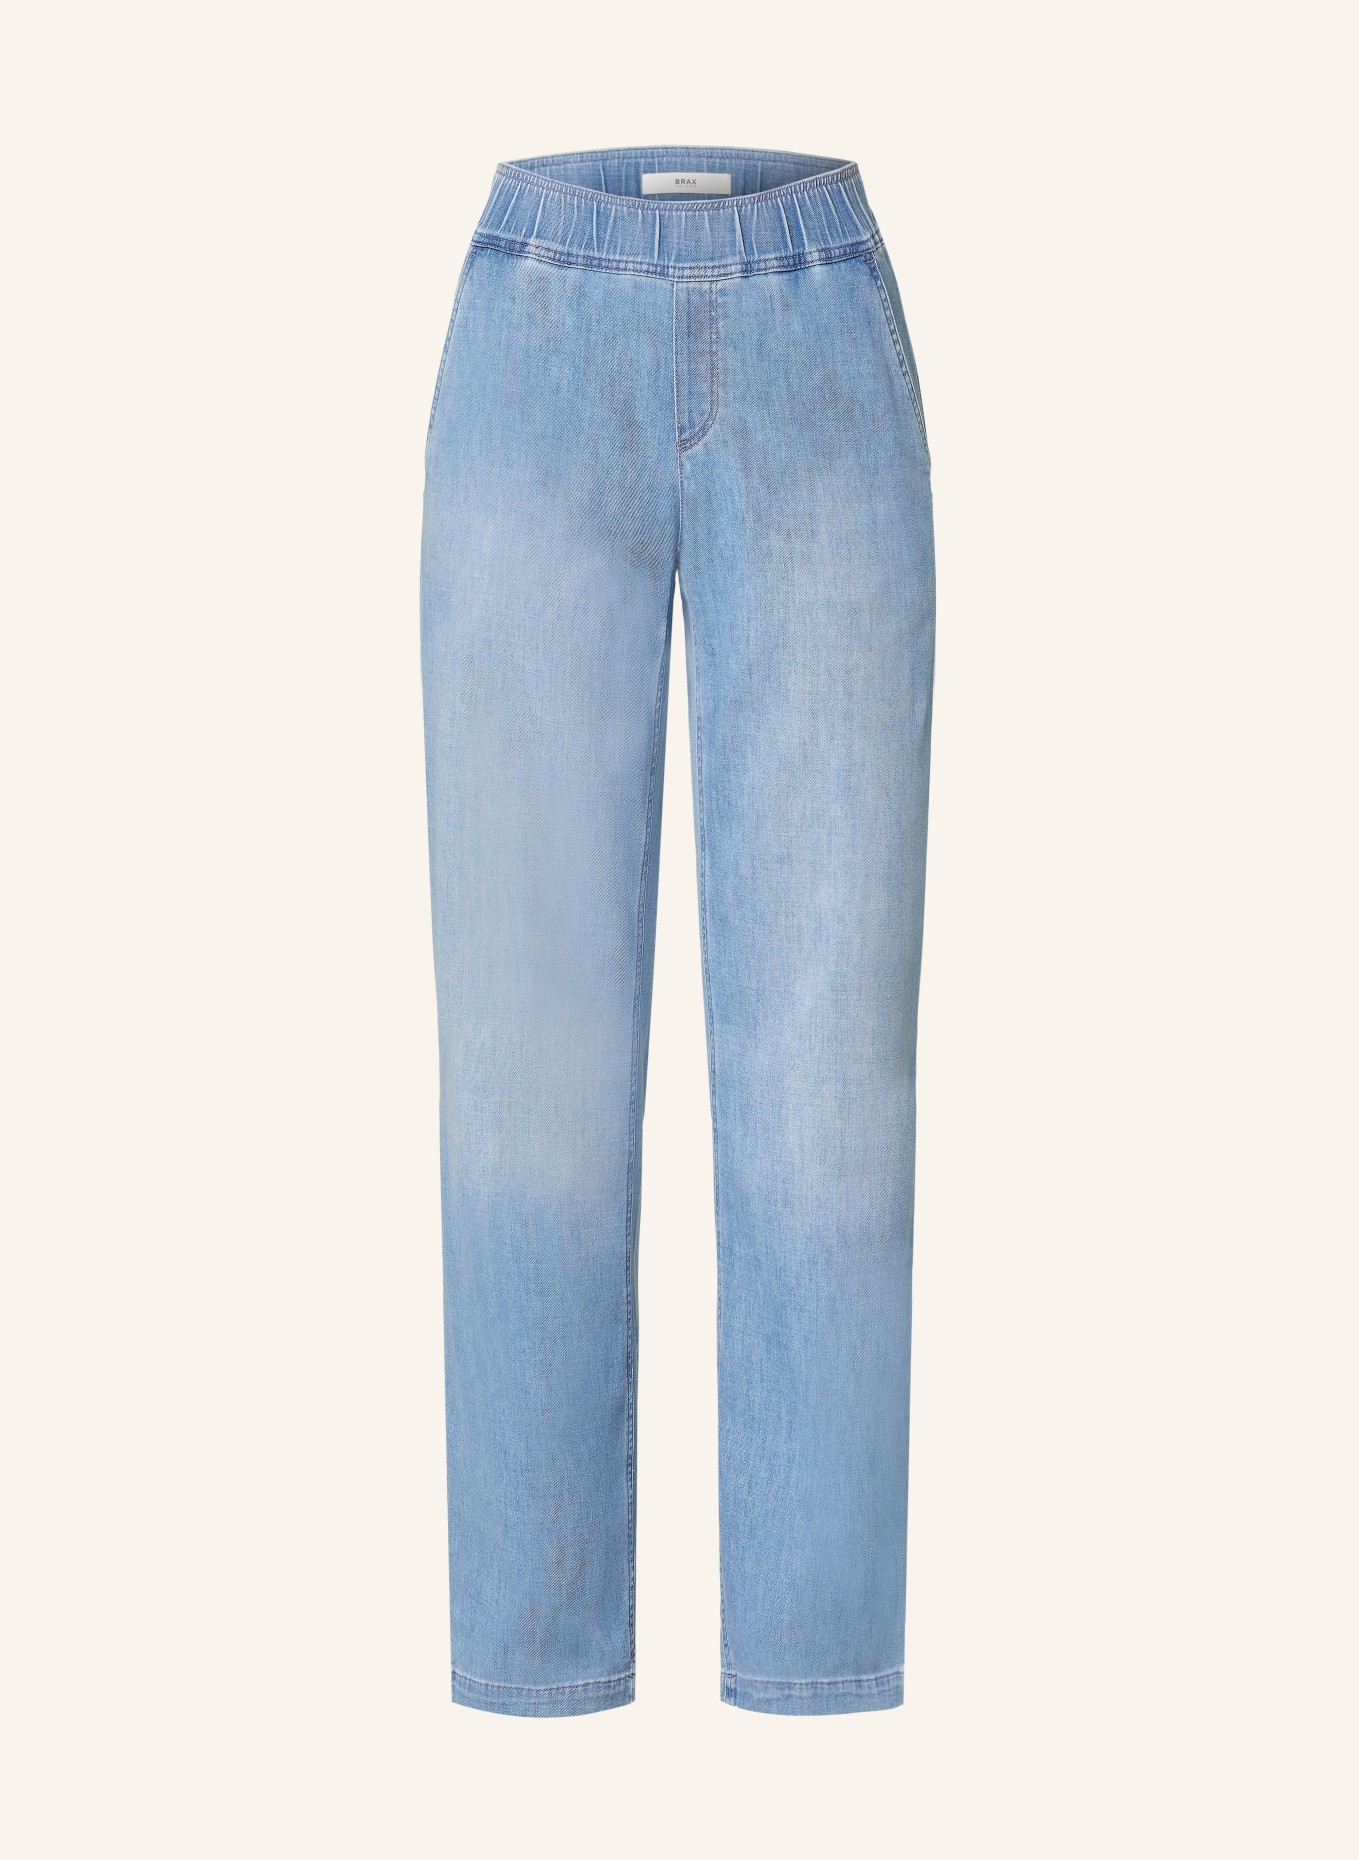 BRAX Trousers MAINE in denim look, Color: 28 USED BLEACHED BLUE (Image 1)